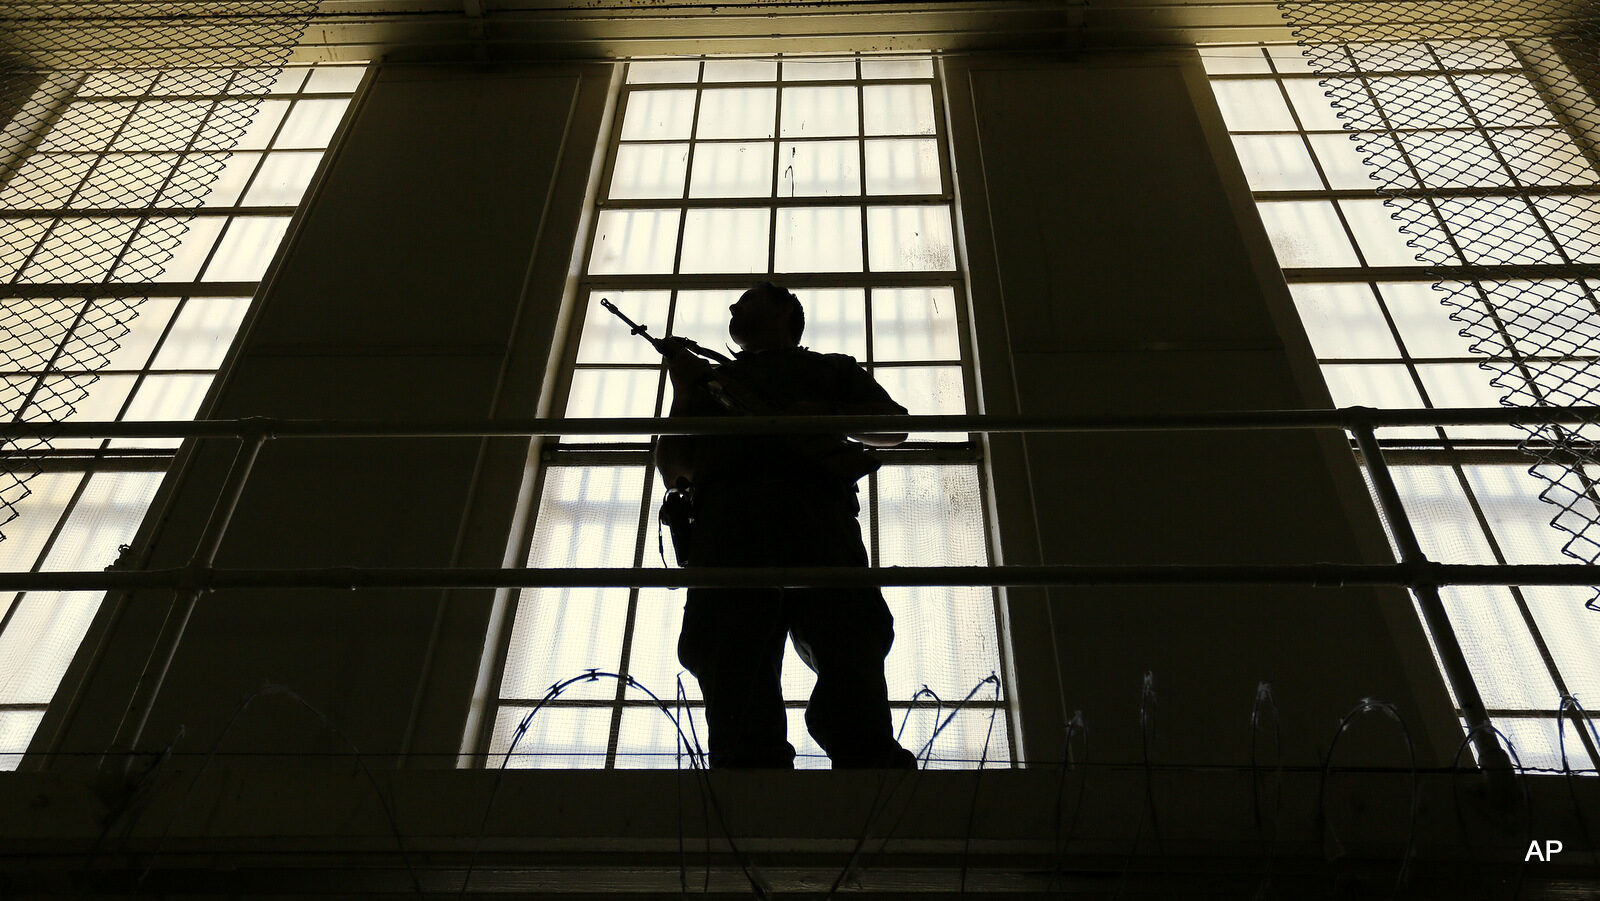 A guard stands watch over the east block of death row at San Quentin State Prison Tuesday, Aug. 16, 2016, in San Quentin, Calif. A pair of November ballot measures will decide the future of the death penalty in California. As of Aug. 1, 2016, there were 700 condemned inmates at the prison.